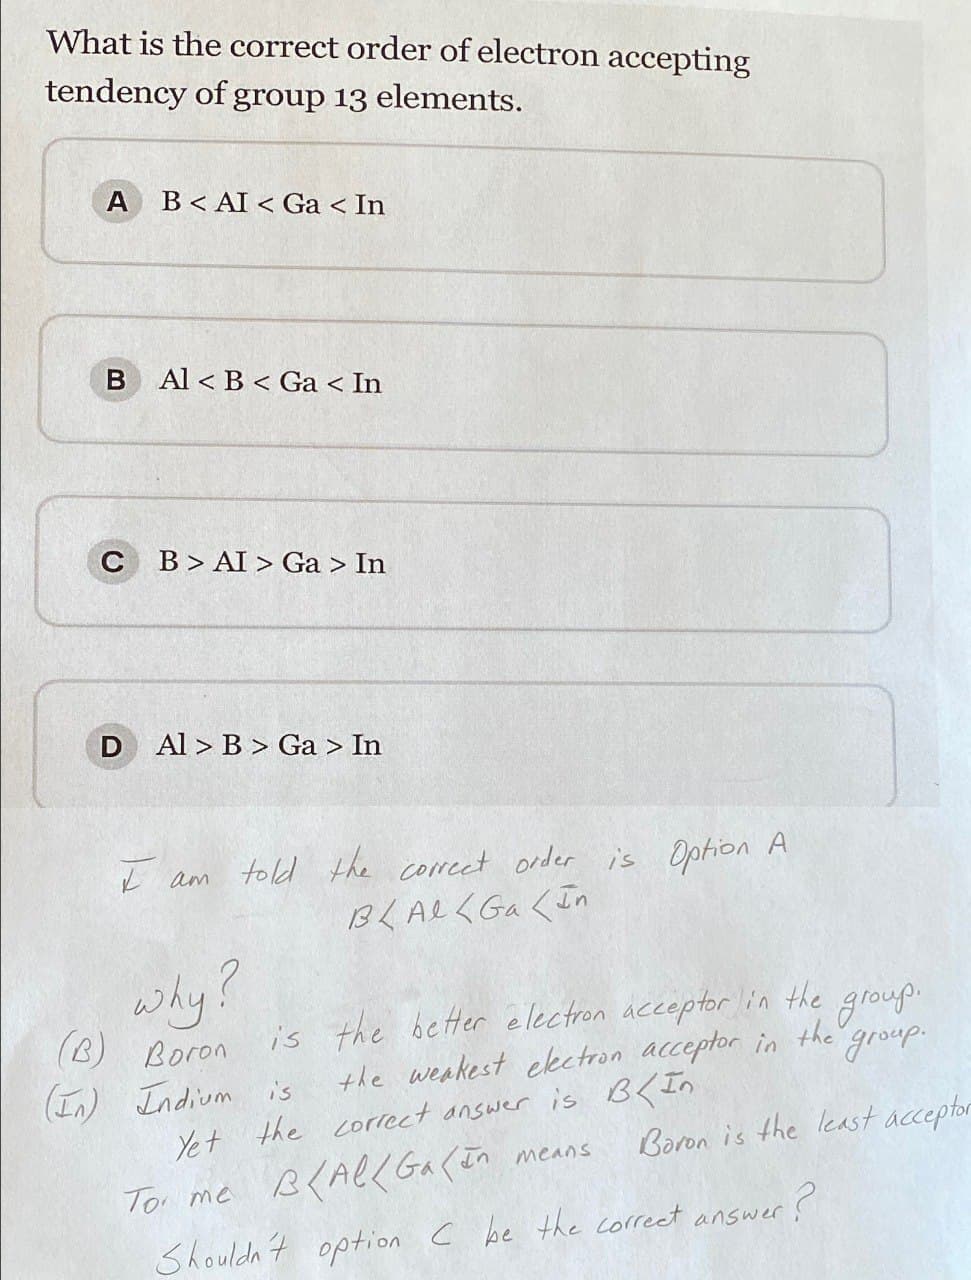 What is the correct order of electron accepting
tendency of group 13 elements.
A B<AI < Ga < In
B Al<B< Ga < In
C BAI > Ga > In
D
Al > B > Ga > In
I am told the correct order is Option A
why?
BLAlGaIn
is the better electron acceptor in the
(B) Boron
(In) Indium is
the weakest electron acceptor in
Yet the correct answer is B<In
To me B/AllGa(In means
group.
the
group.
Boron is the least acceptor
Shouldn't option C be the correct answer?